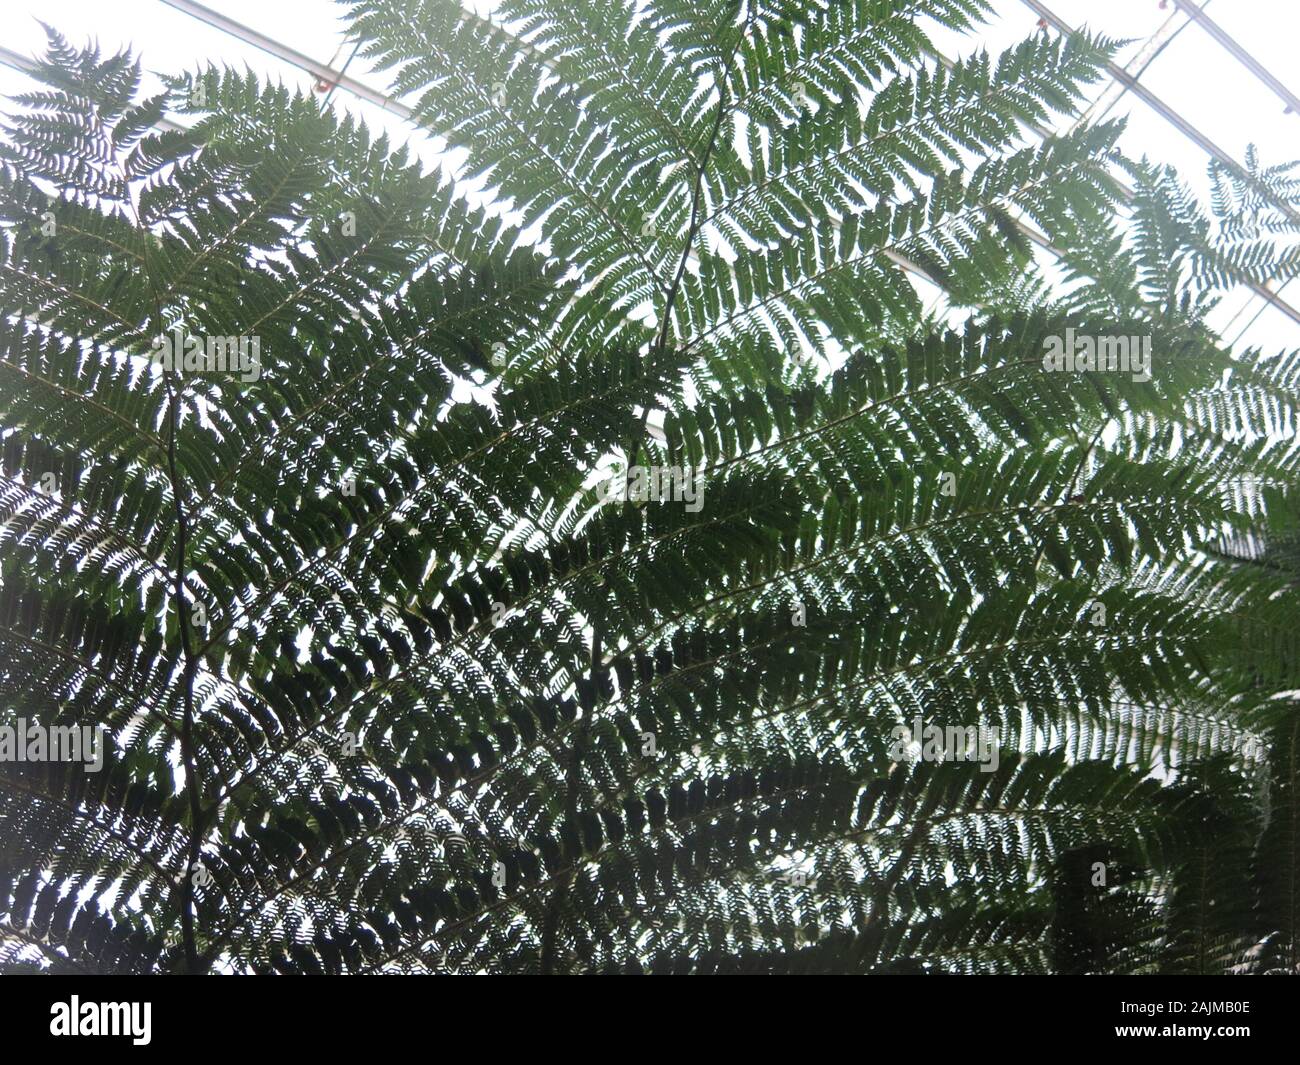 Close-up of over-lapping fronds of tree fern to create an abstract pattern of lacy foliage against a bright light background. Stock Photo